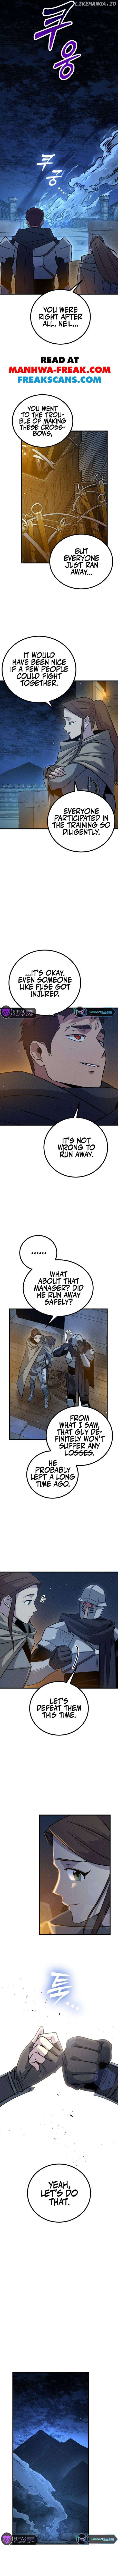 Was Manager Seo disposed of as an industrial accident? Chapter 18 - page 4